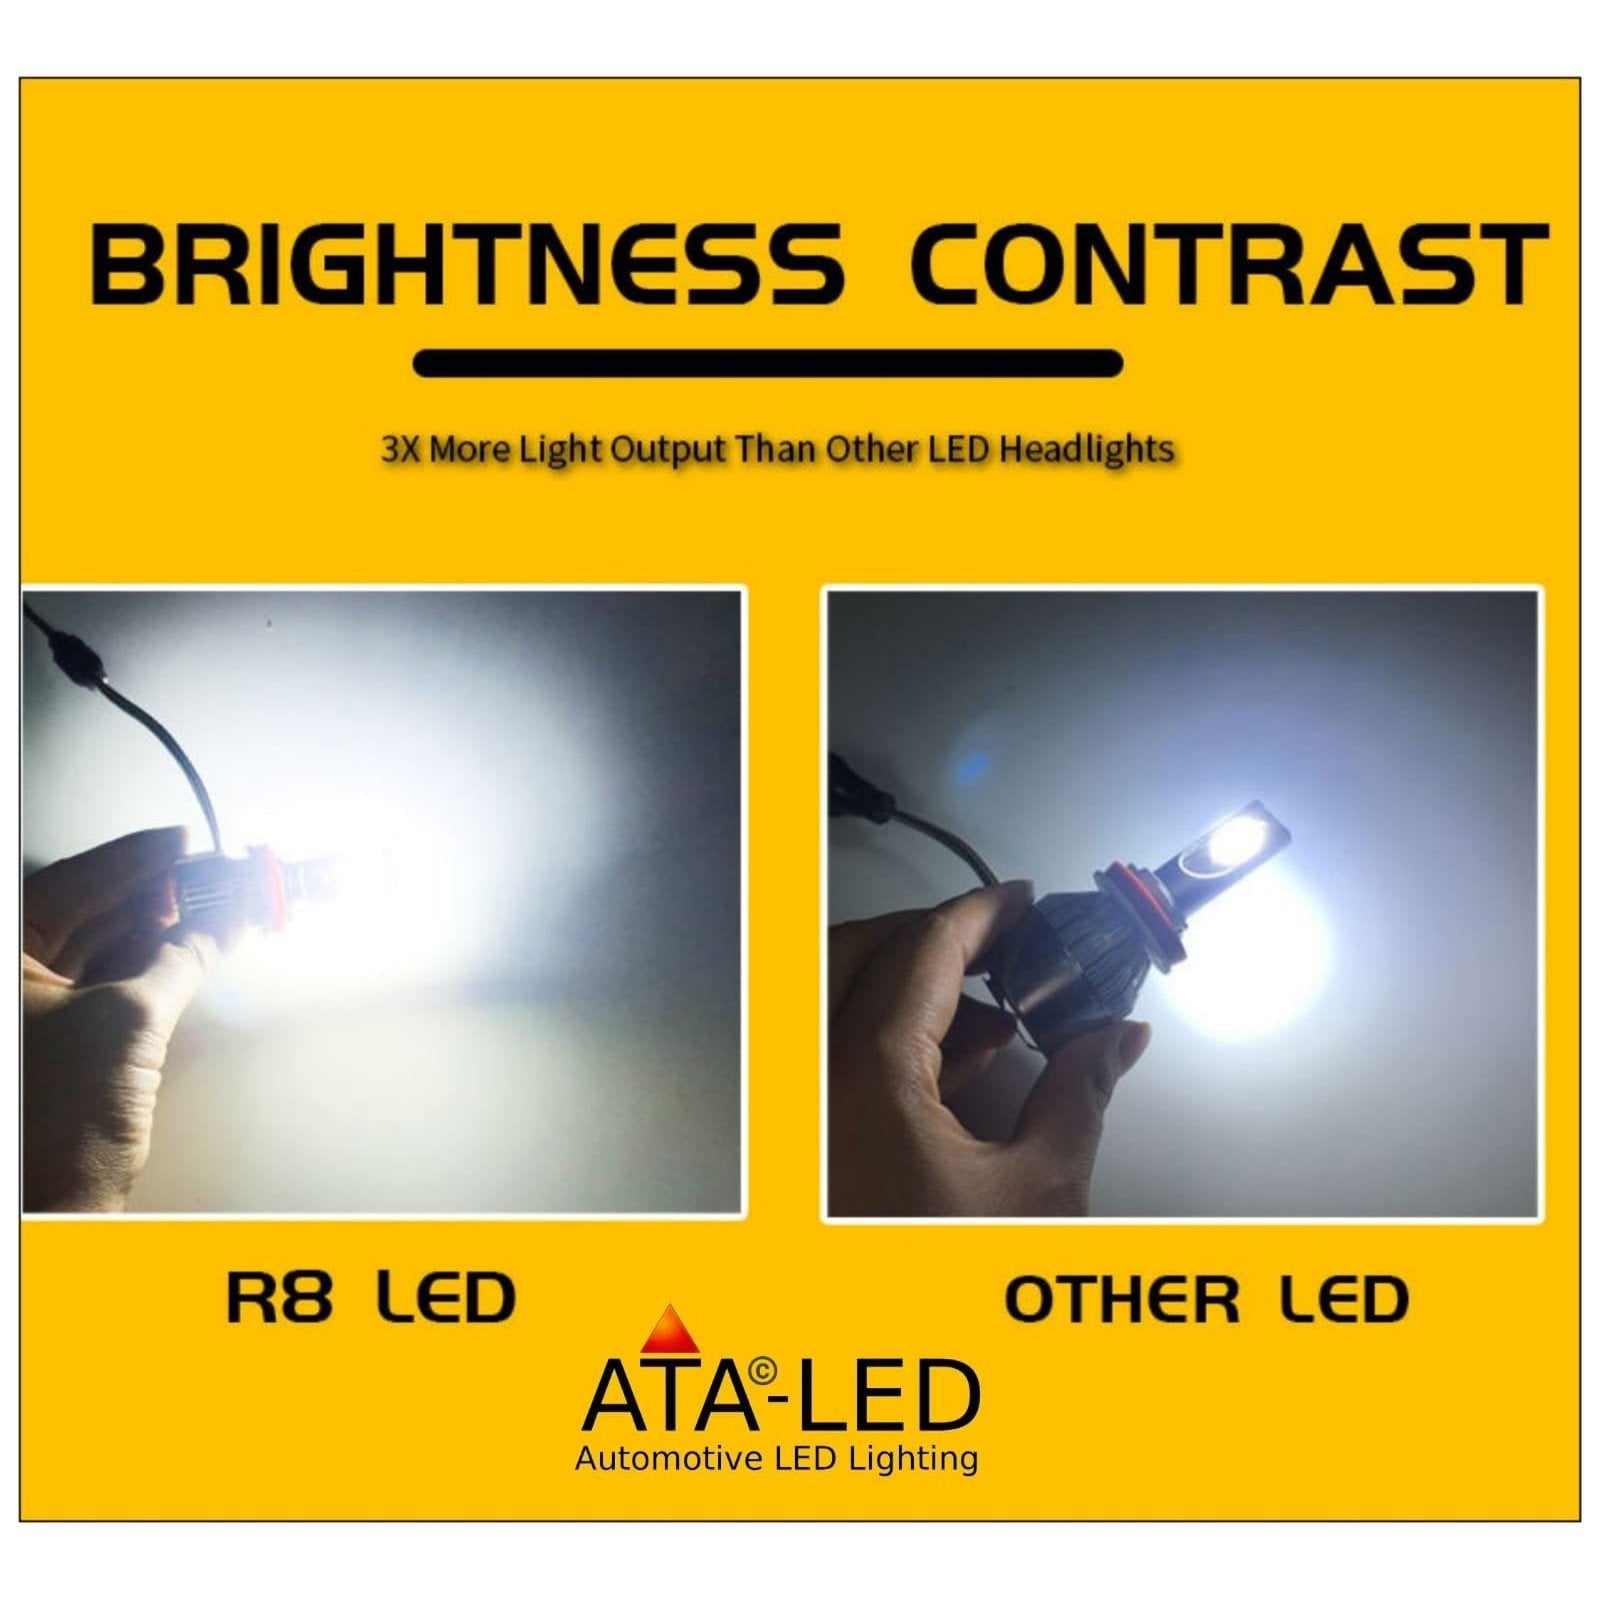 Brightness Contrast R8 Led VS Other Led 3X More Light Output Than Other LED Headlights